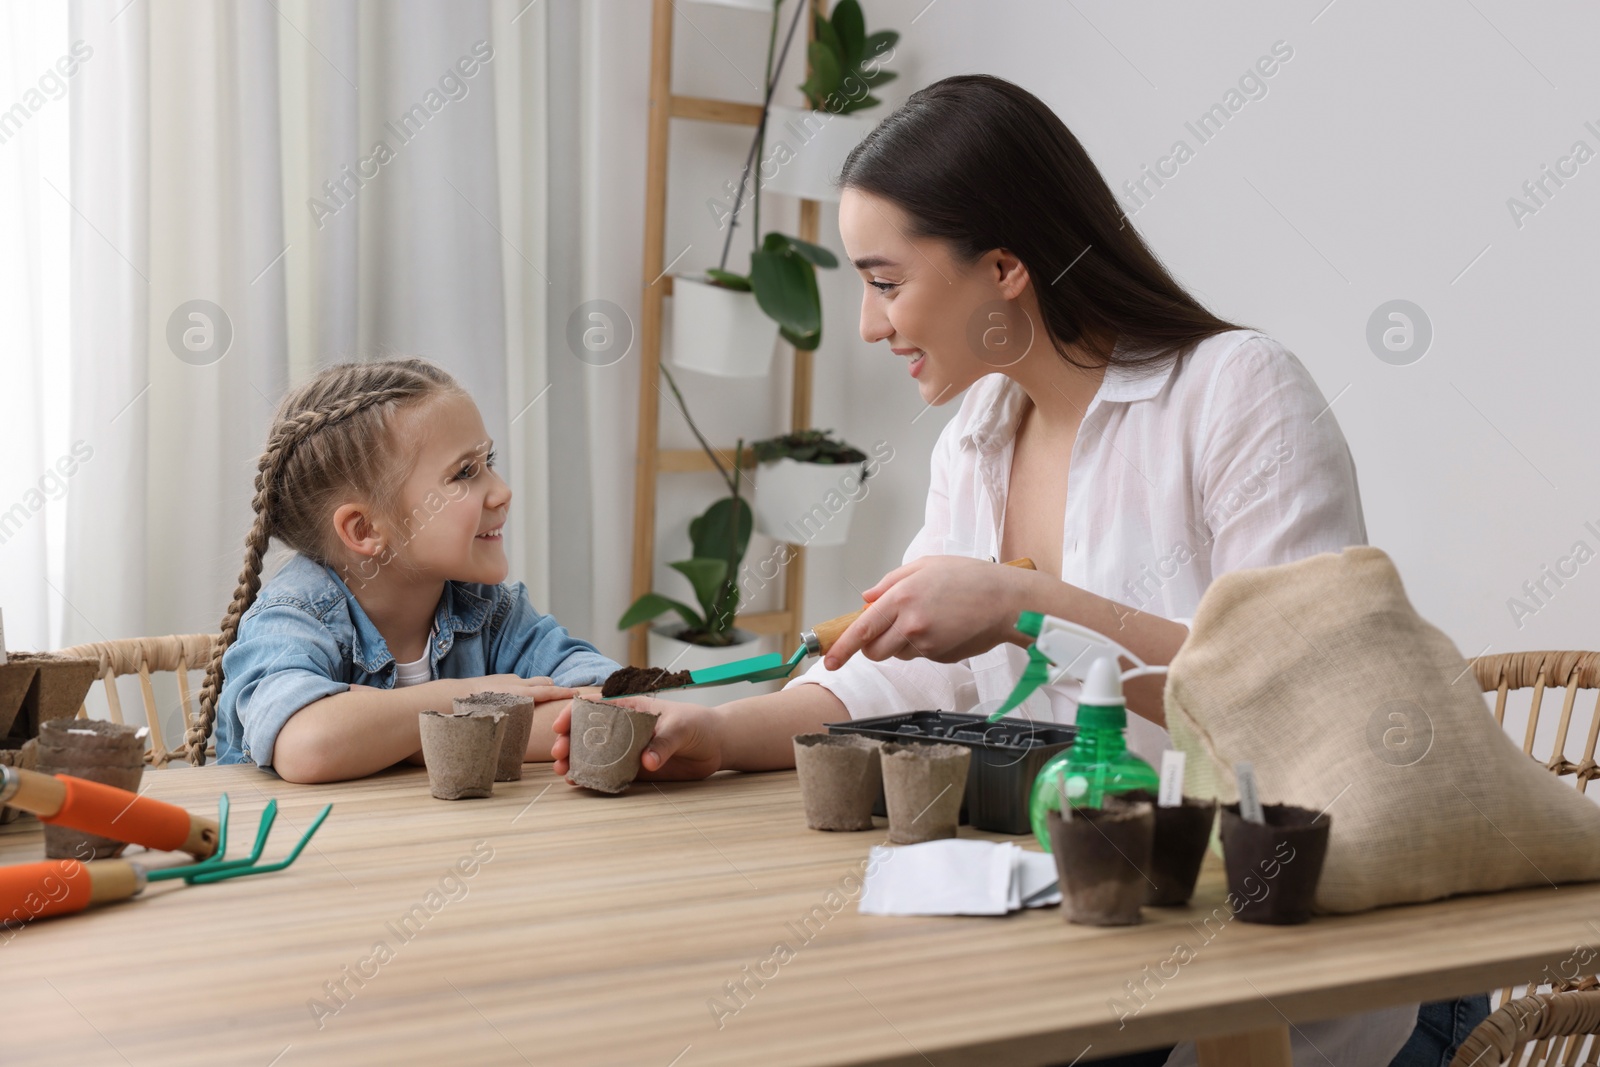 Photo of Mother showing her daughter how to fill peat pots with soil at wooden table indoors. Growing vegetable seeds